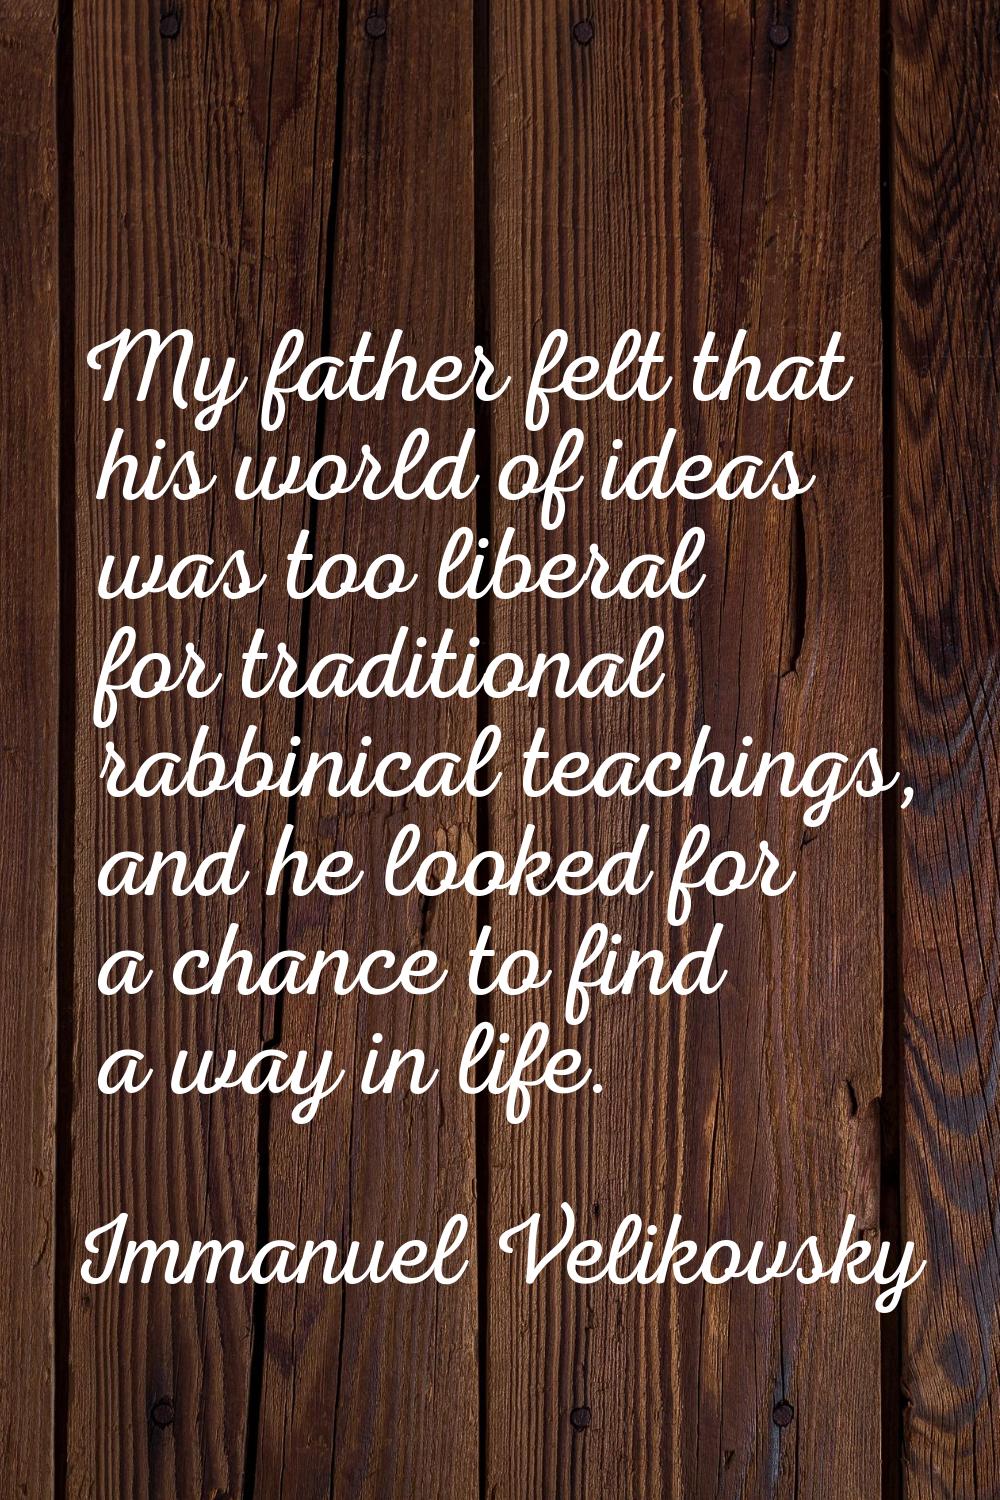 My father felt that his world of ideas was too liberal for traditional rabbinical teachings, and he